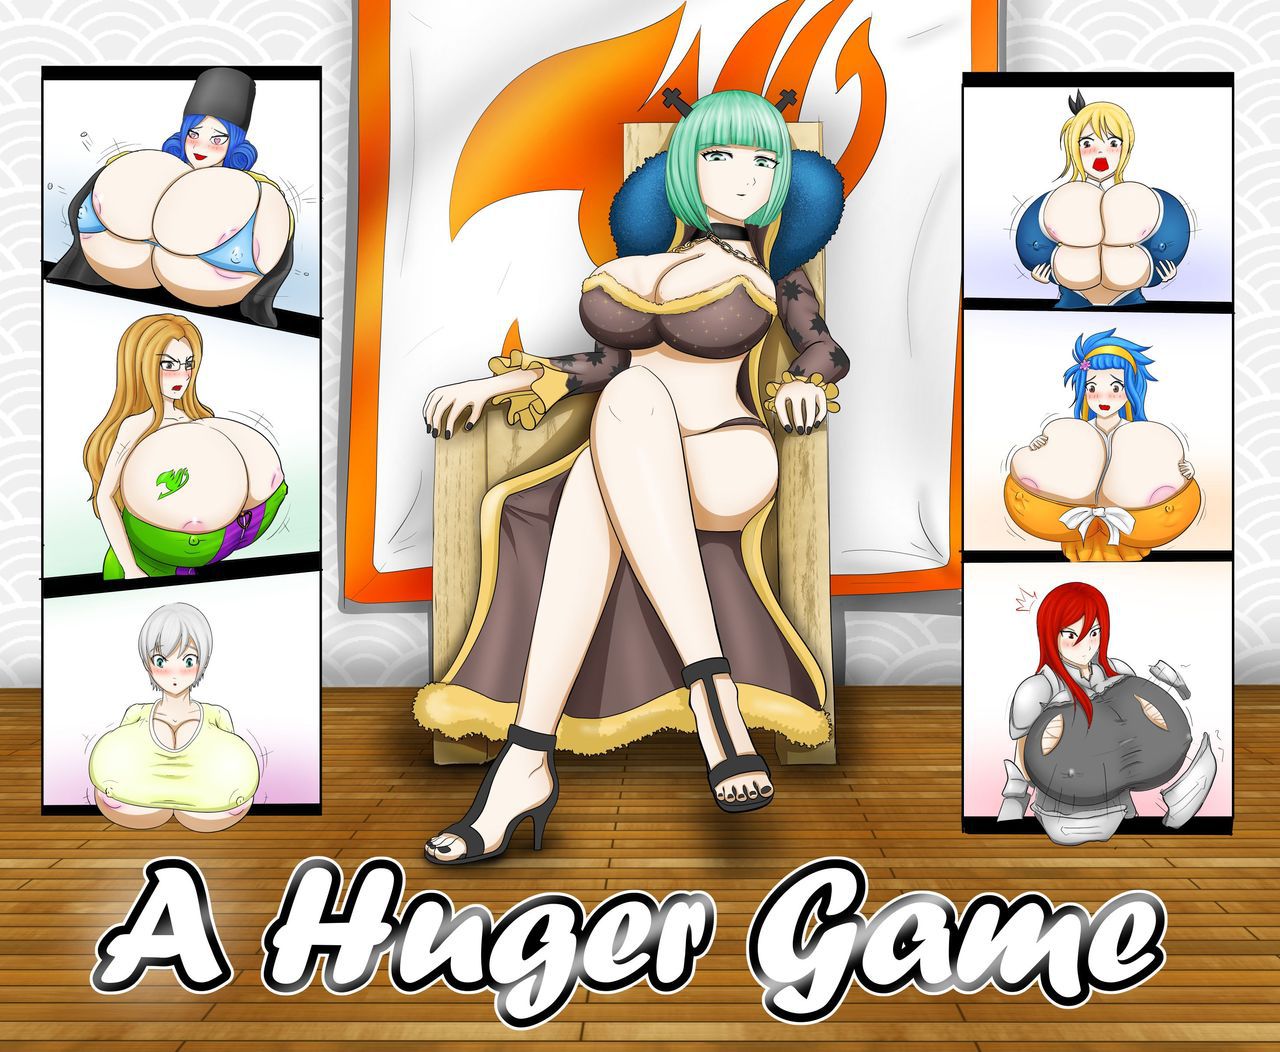 [EscapeFromExpansion] A Huger Game (Fairy Tail) [Ongoing] 1